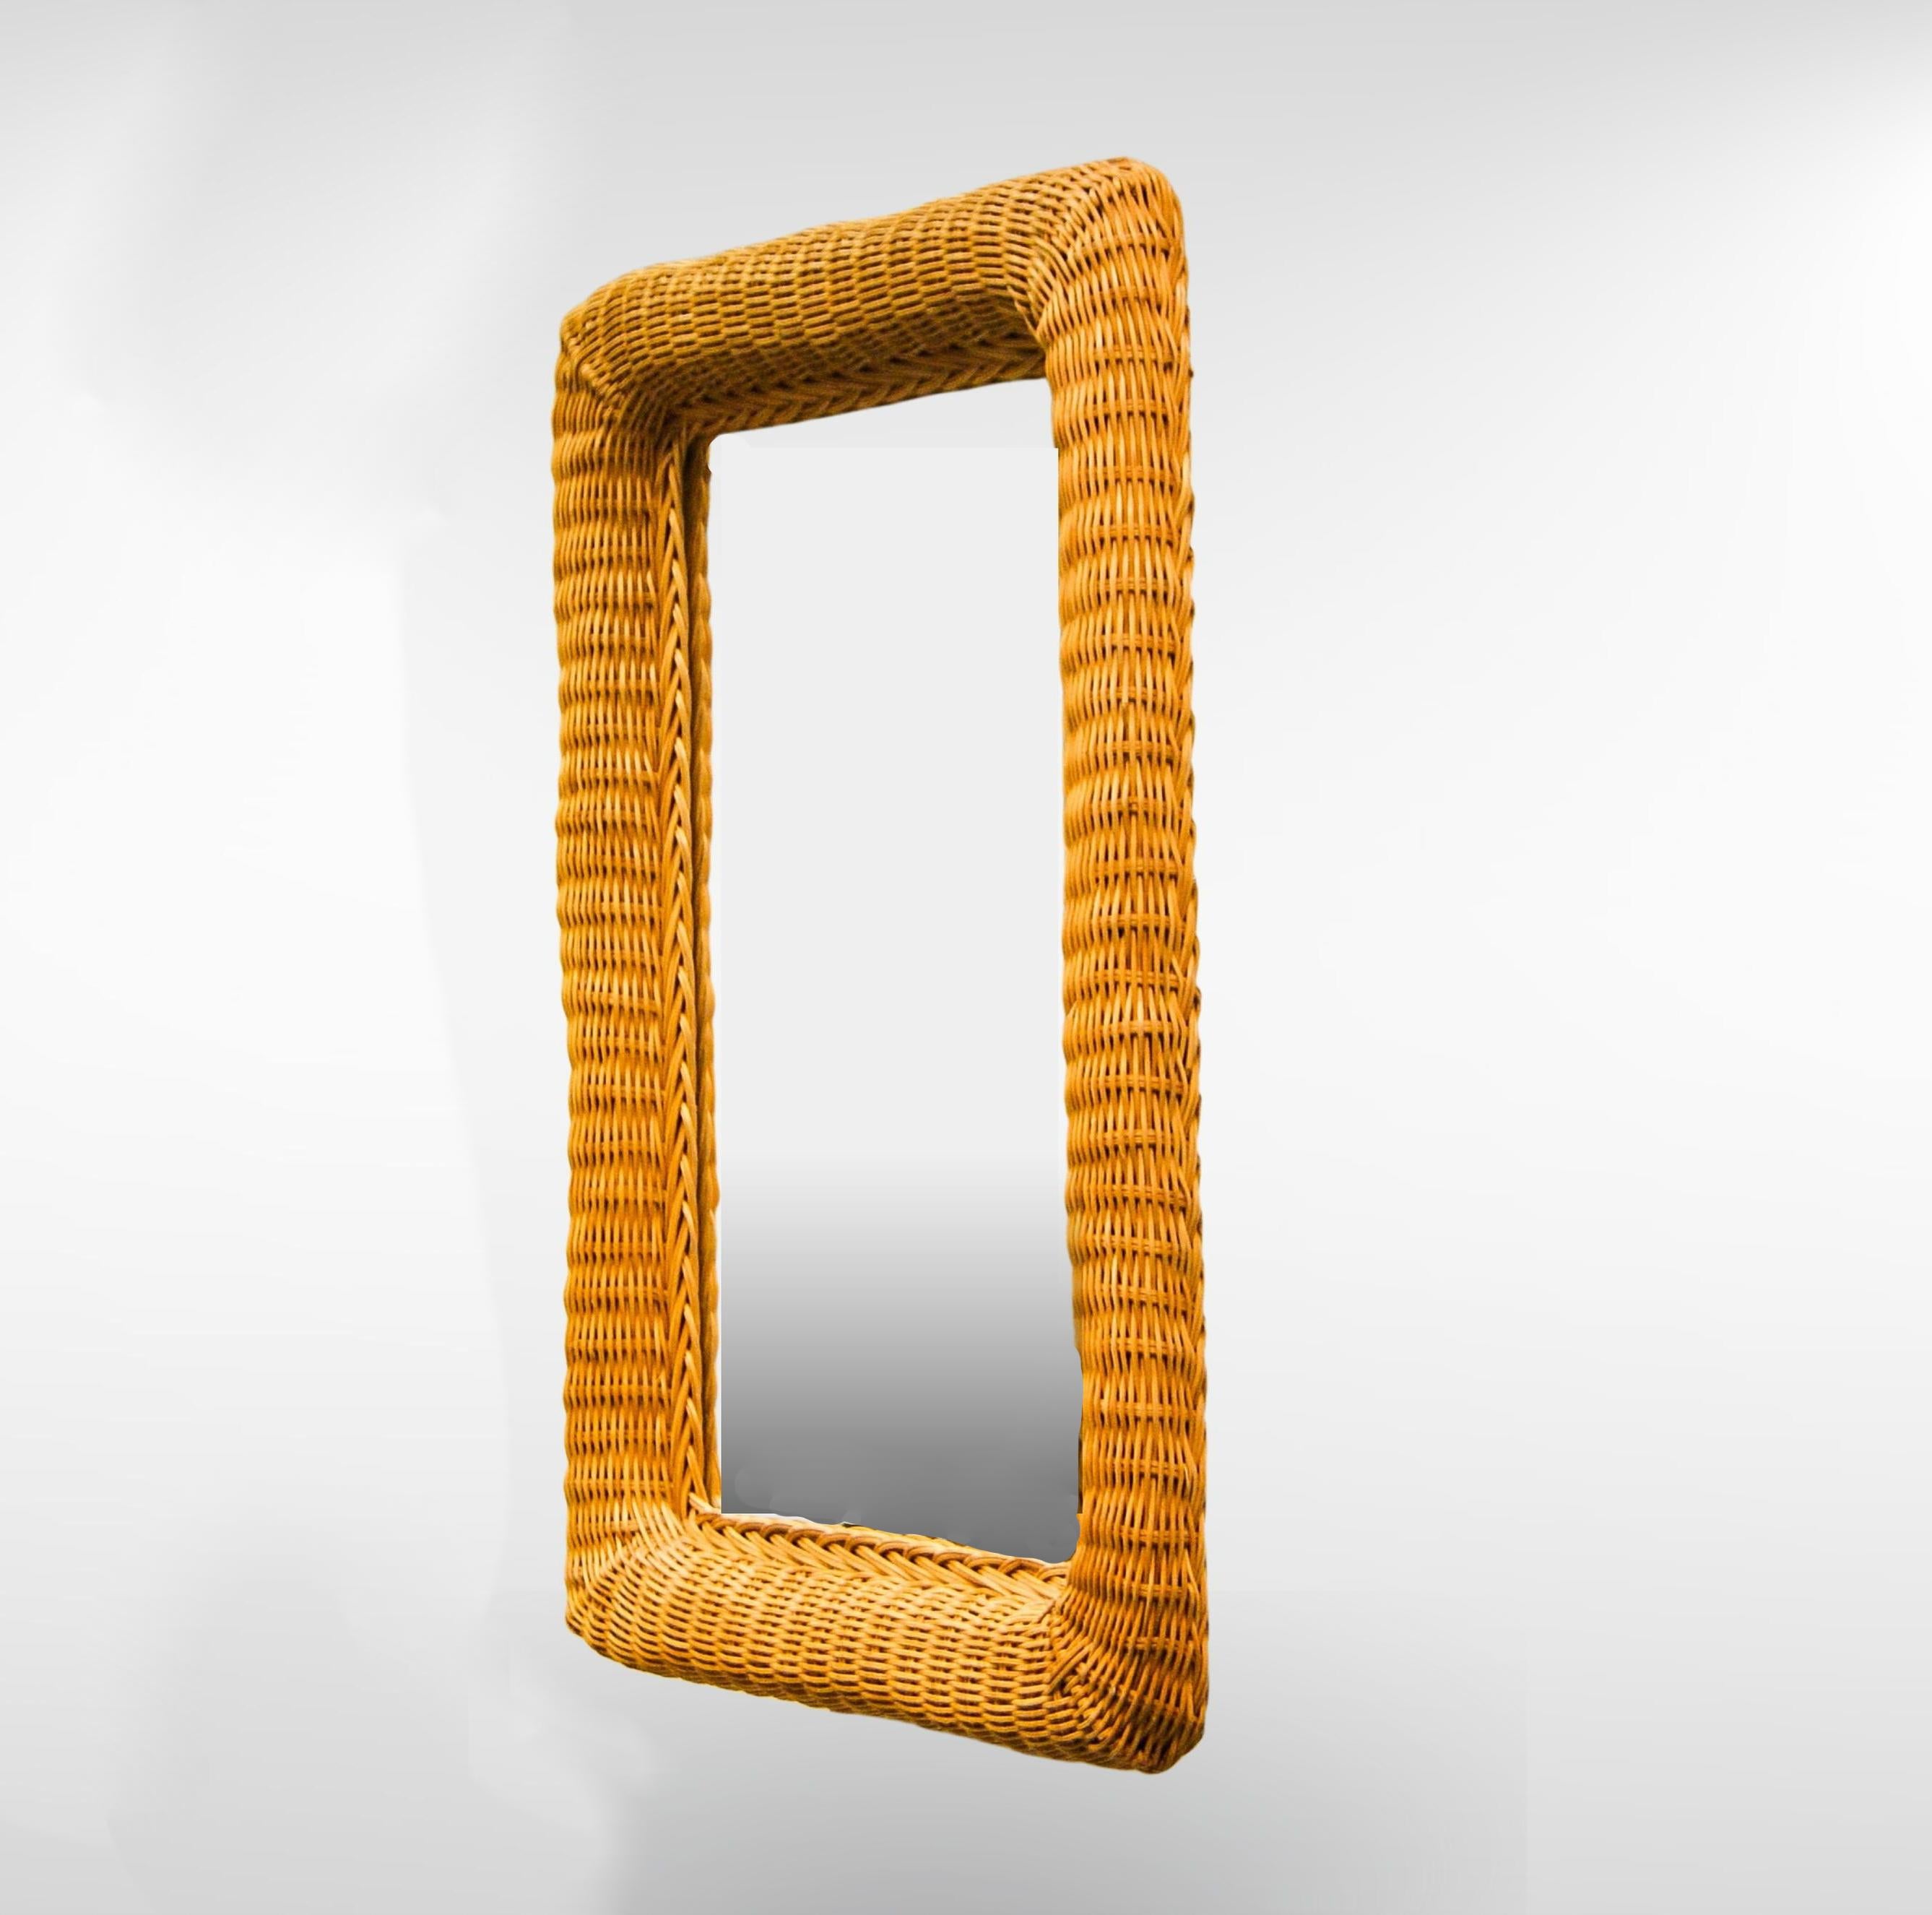 Gorgeous 1960s Italian rattan wall hanging mirror.
The mirror has wide woven rattan frame and can be hung horizontally or vertically.
Highly decorative large sized mirror.

In very good vintage condition.
Shows small signs consistent with